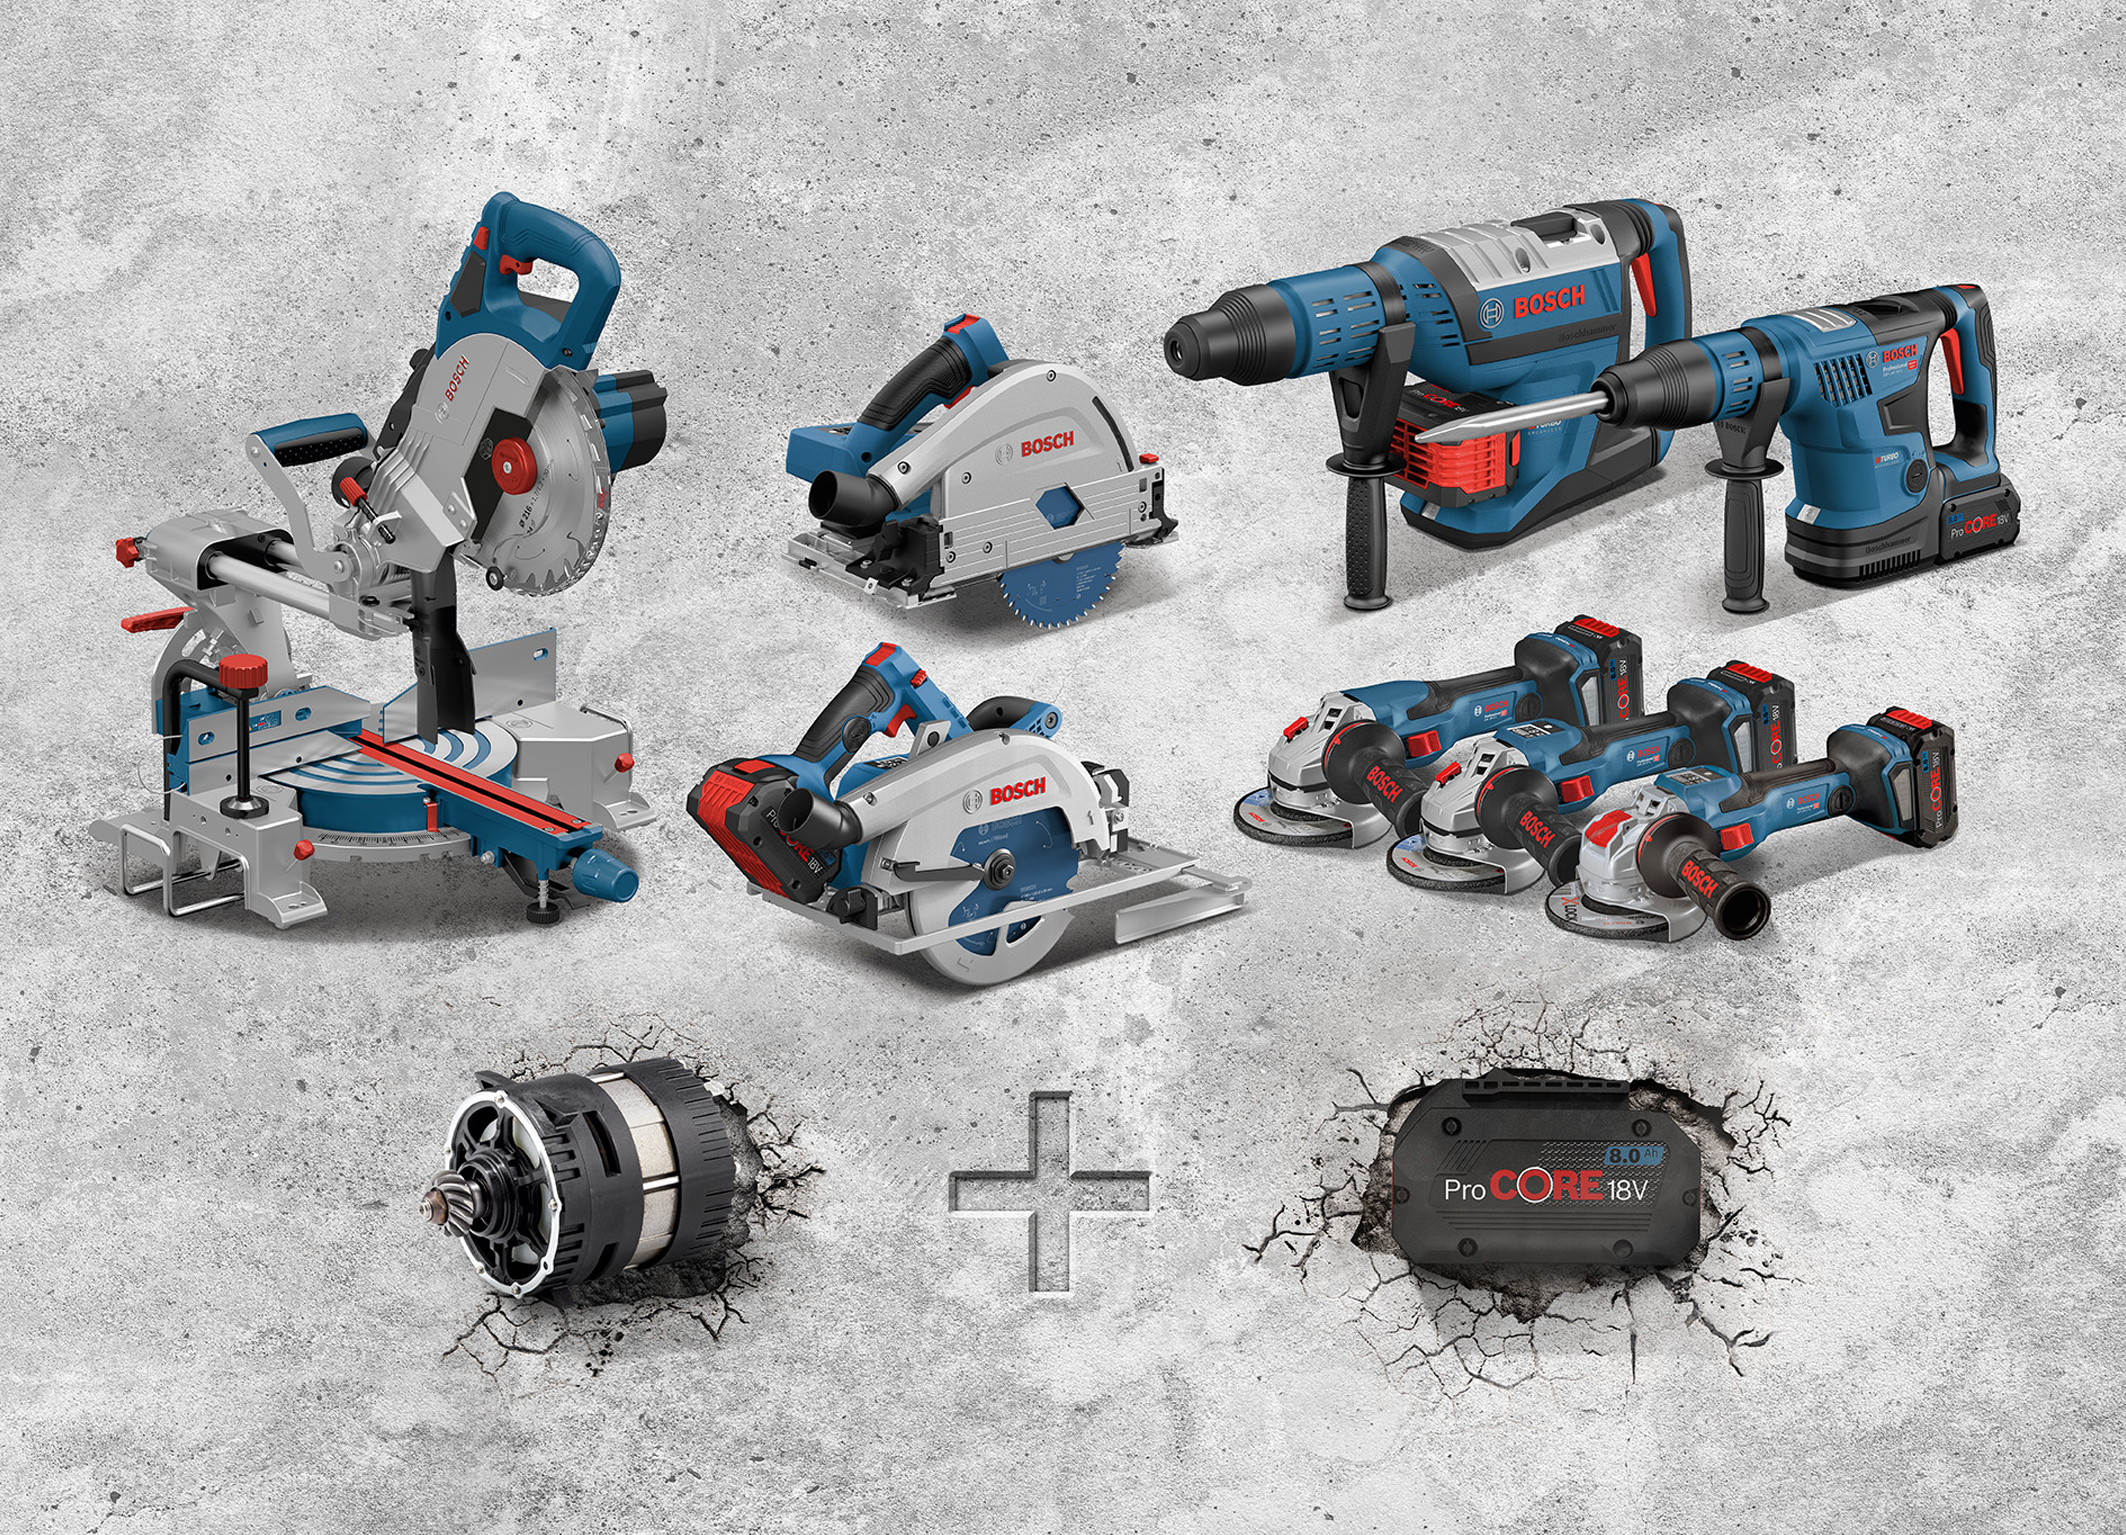 Cordless tools now better than corded tools: Biturbo tools from Bosch for professionals